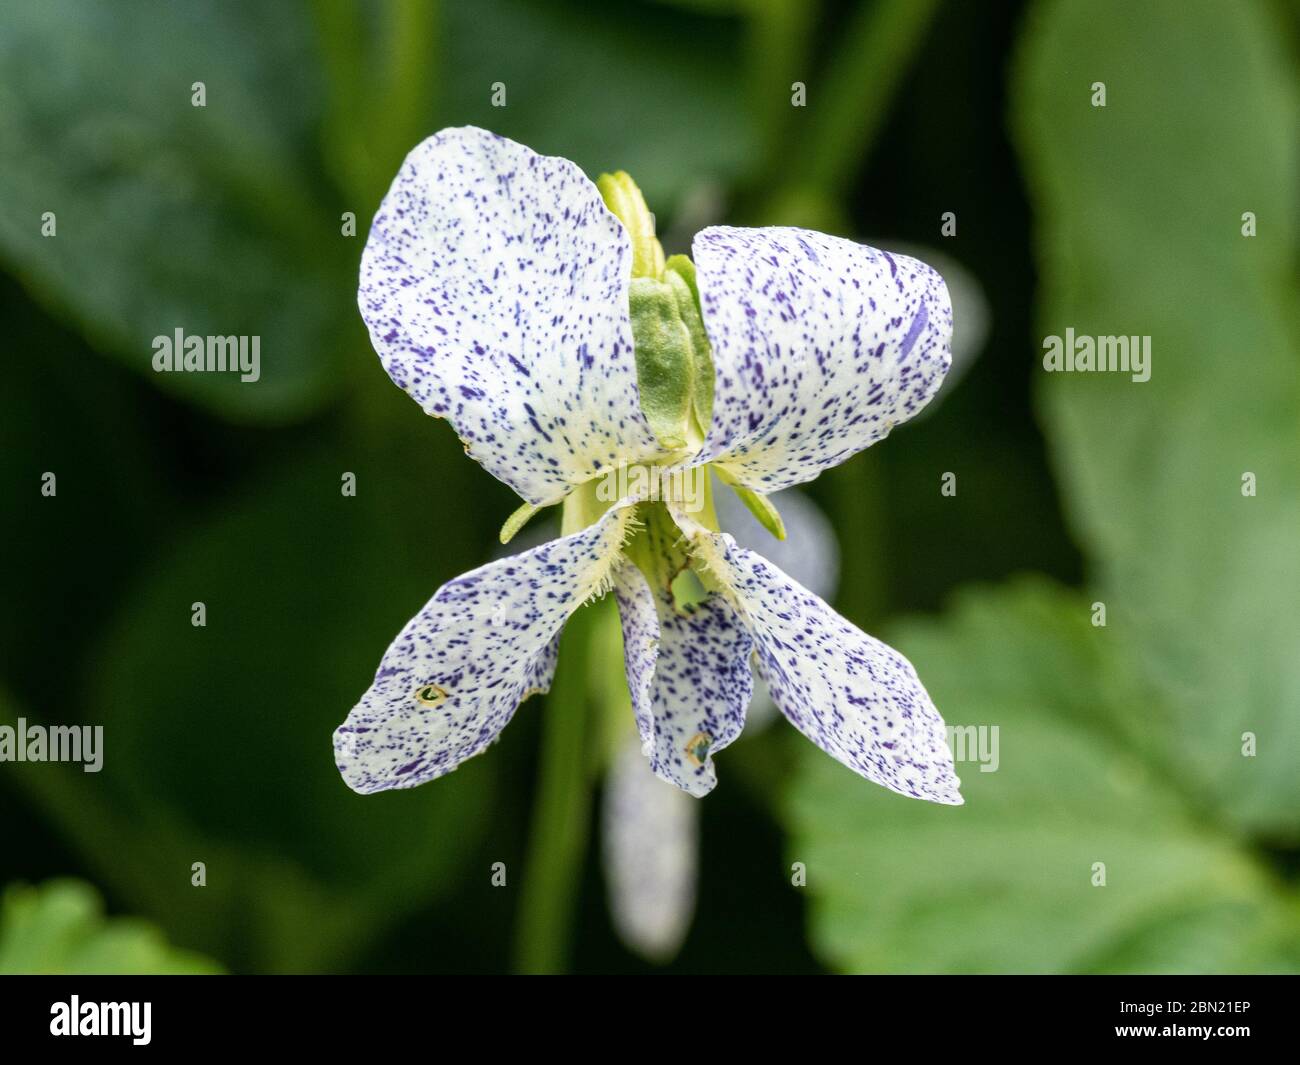 A close up of the delicate white and purple spotted flower of Viola sororia 'Freckles' Stock Photo